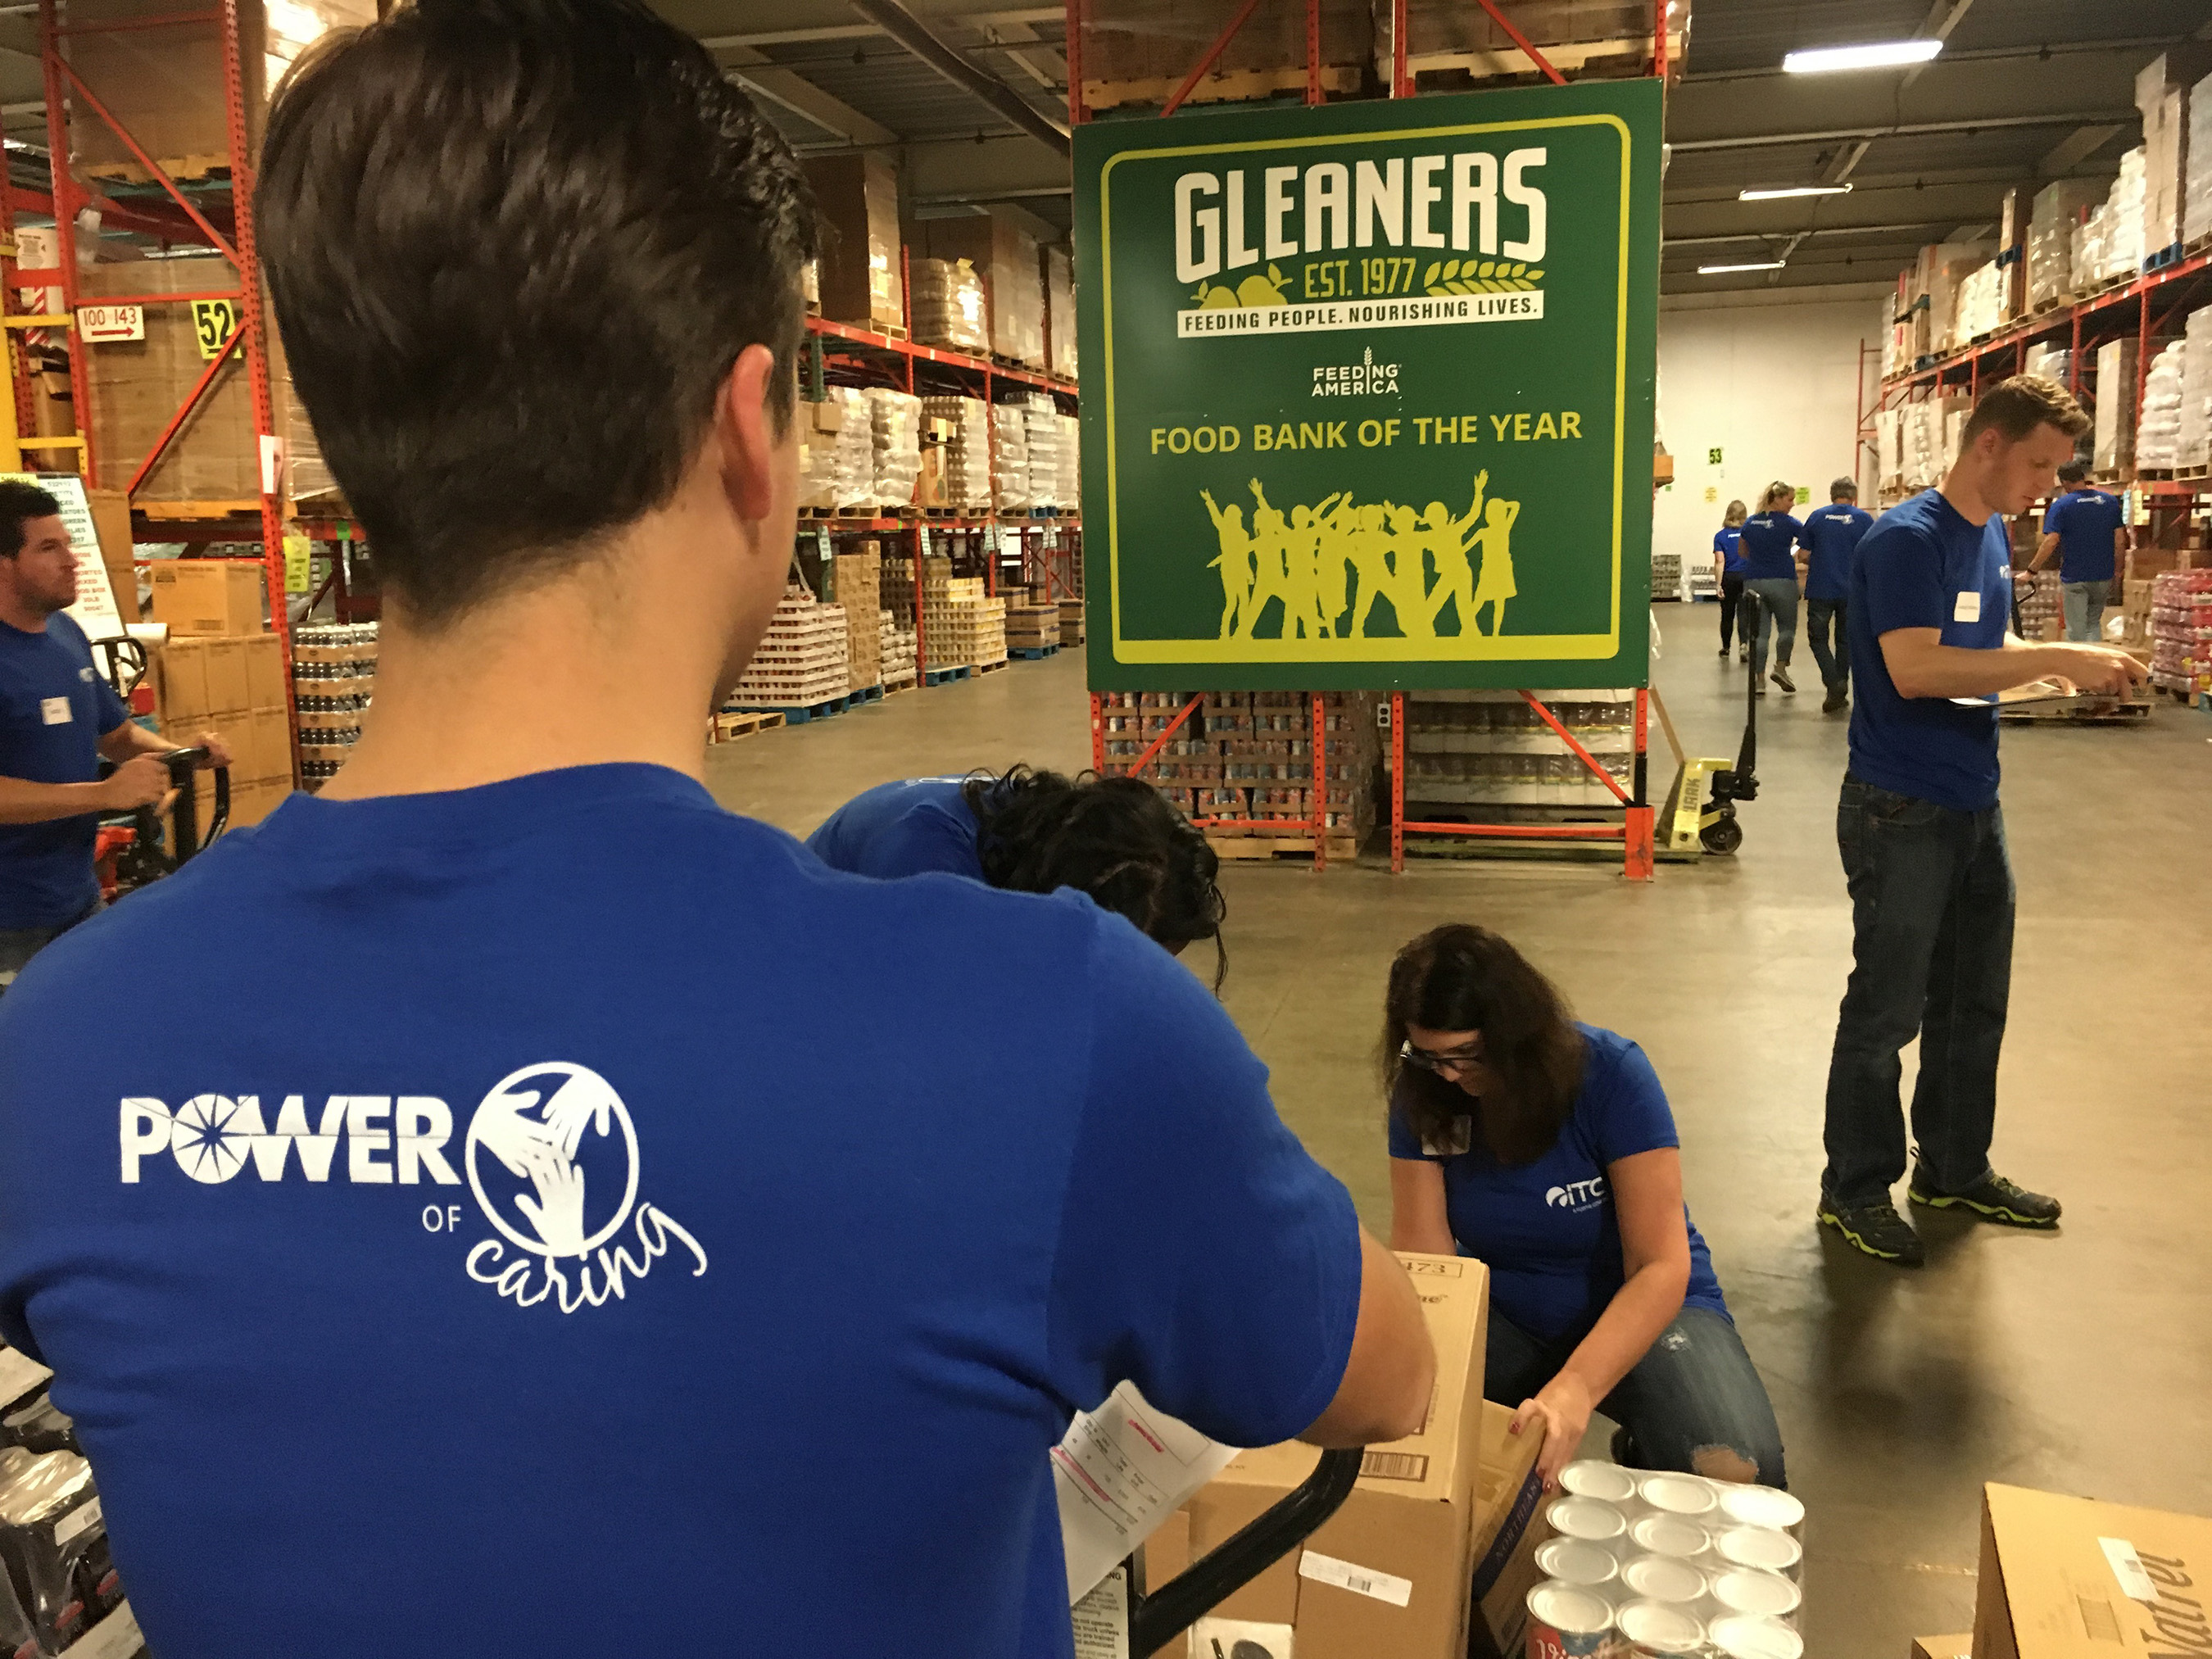 ITC recently launched its Power of Caring initiative, expanding its charitable giving program to include employee volunteerism with community organizations across the company's seven-state footprint.